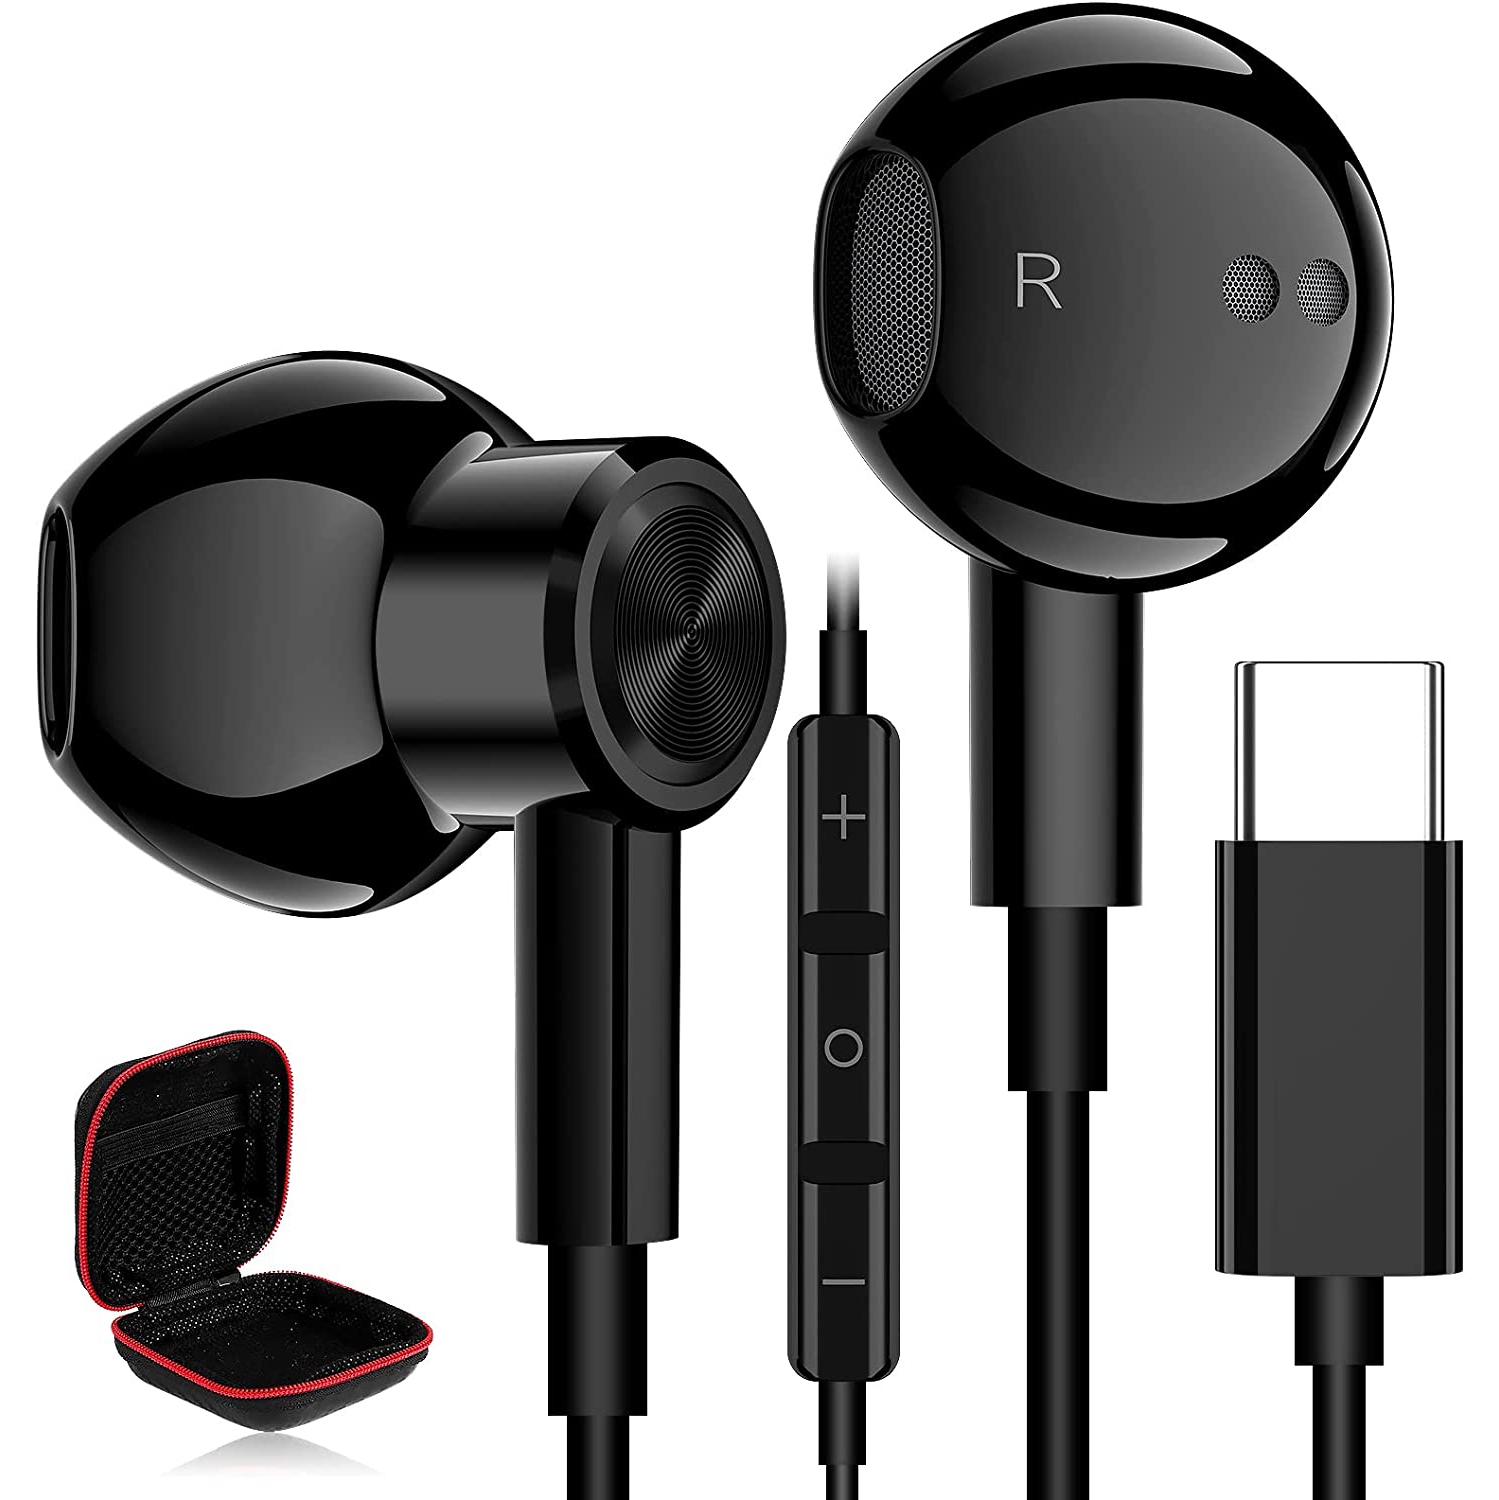 Dolaer USB C Headphones, Magnetic USB Type C Earphone Stereo Earbuds Hi-Fi Digital DAC Bass Mic & Remote Control for Google Pixel 6 5 4a 3 XL OnePlus 10 Pro 8T for Samsung Galaxy N